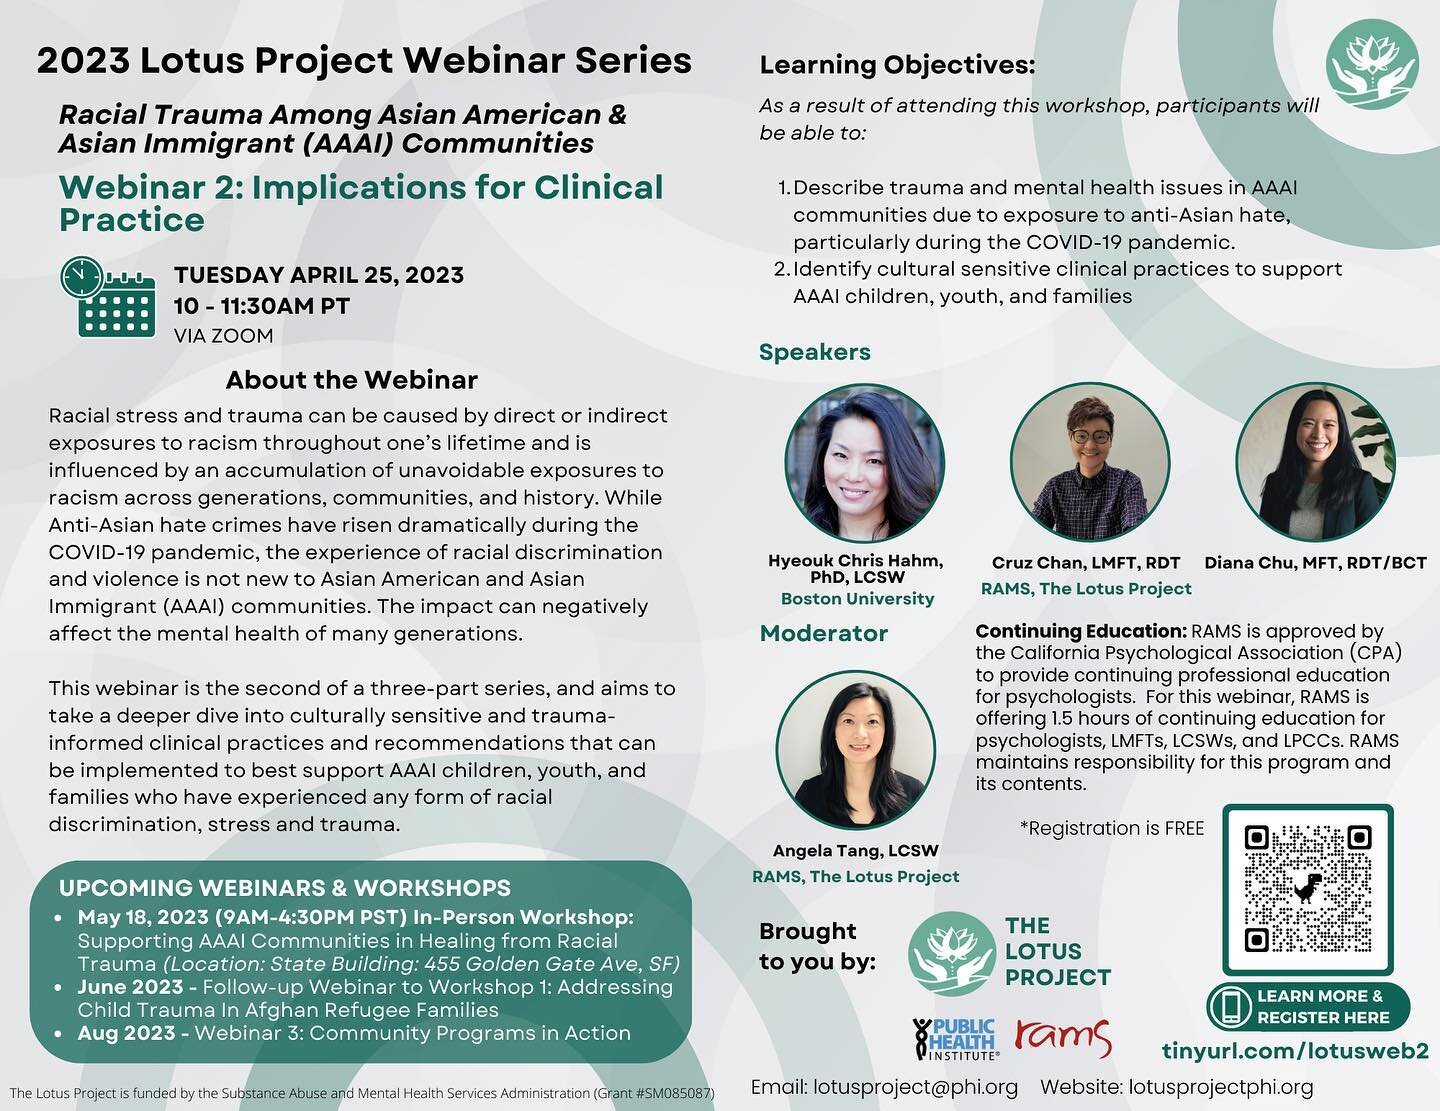 The Lotus Project is excited to present the second webinar of our 3-part webinar series addressing Racial Trauma Among Asian American &amp; Asian Immigrant (AAAI) Communities!

Webinar 2: Implications for Clinical Practice will take place on Tuesday,